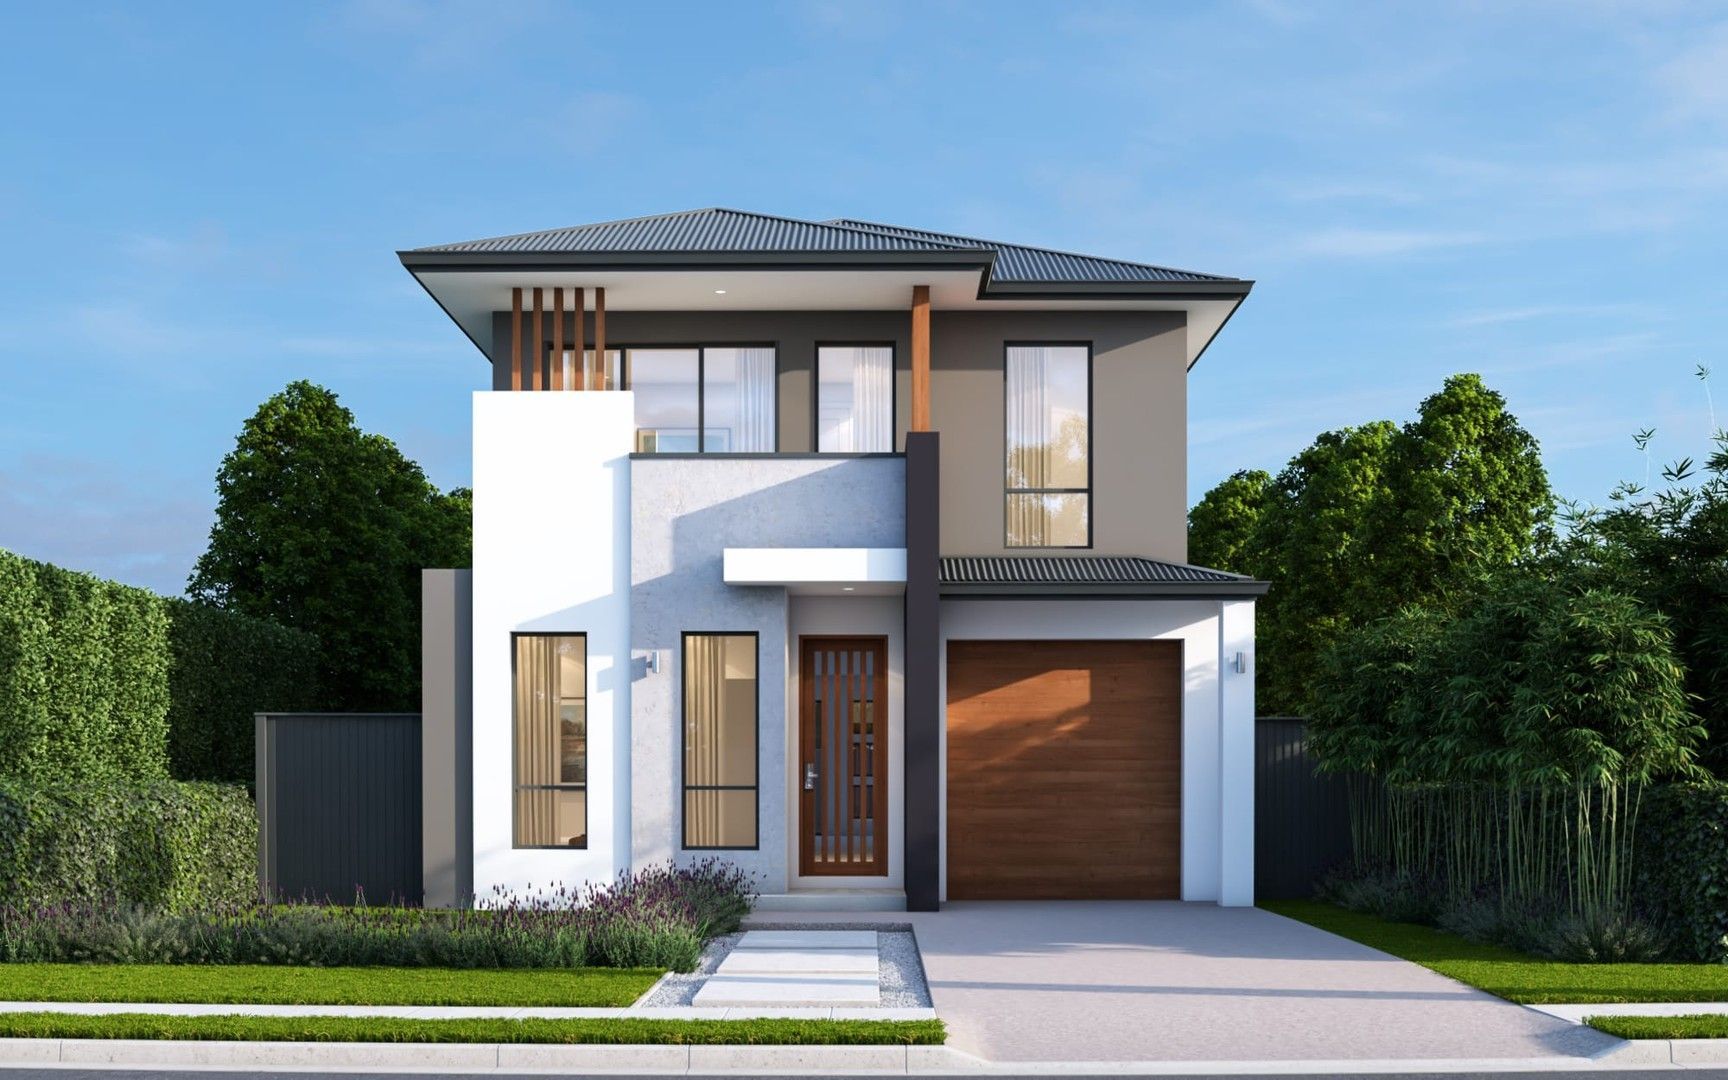 4 bedrooms New House & Land in CALL US NOW SELLING FAST - CALL BHARGAV BOX HILL NSW, 2765